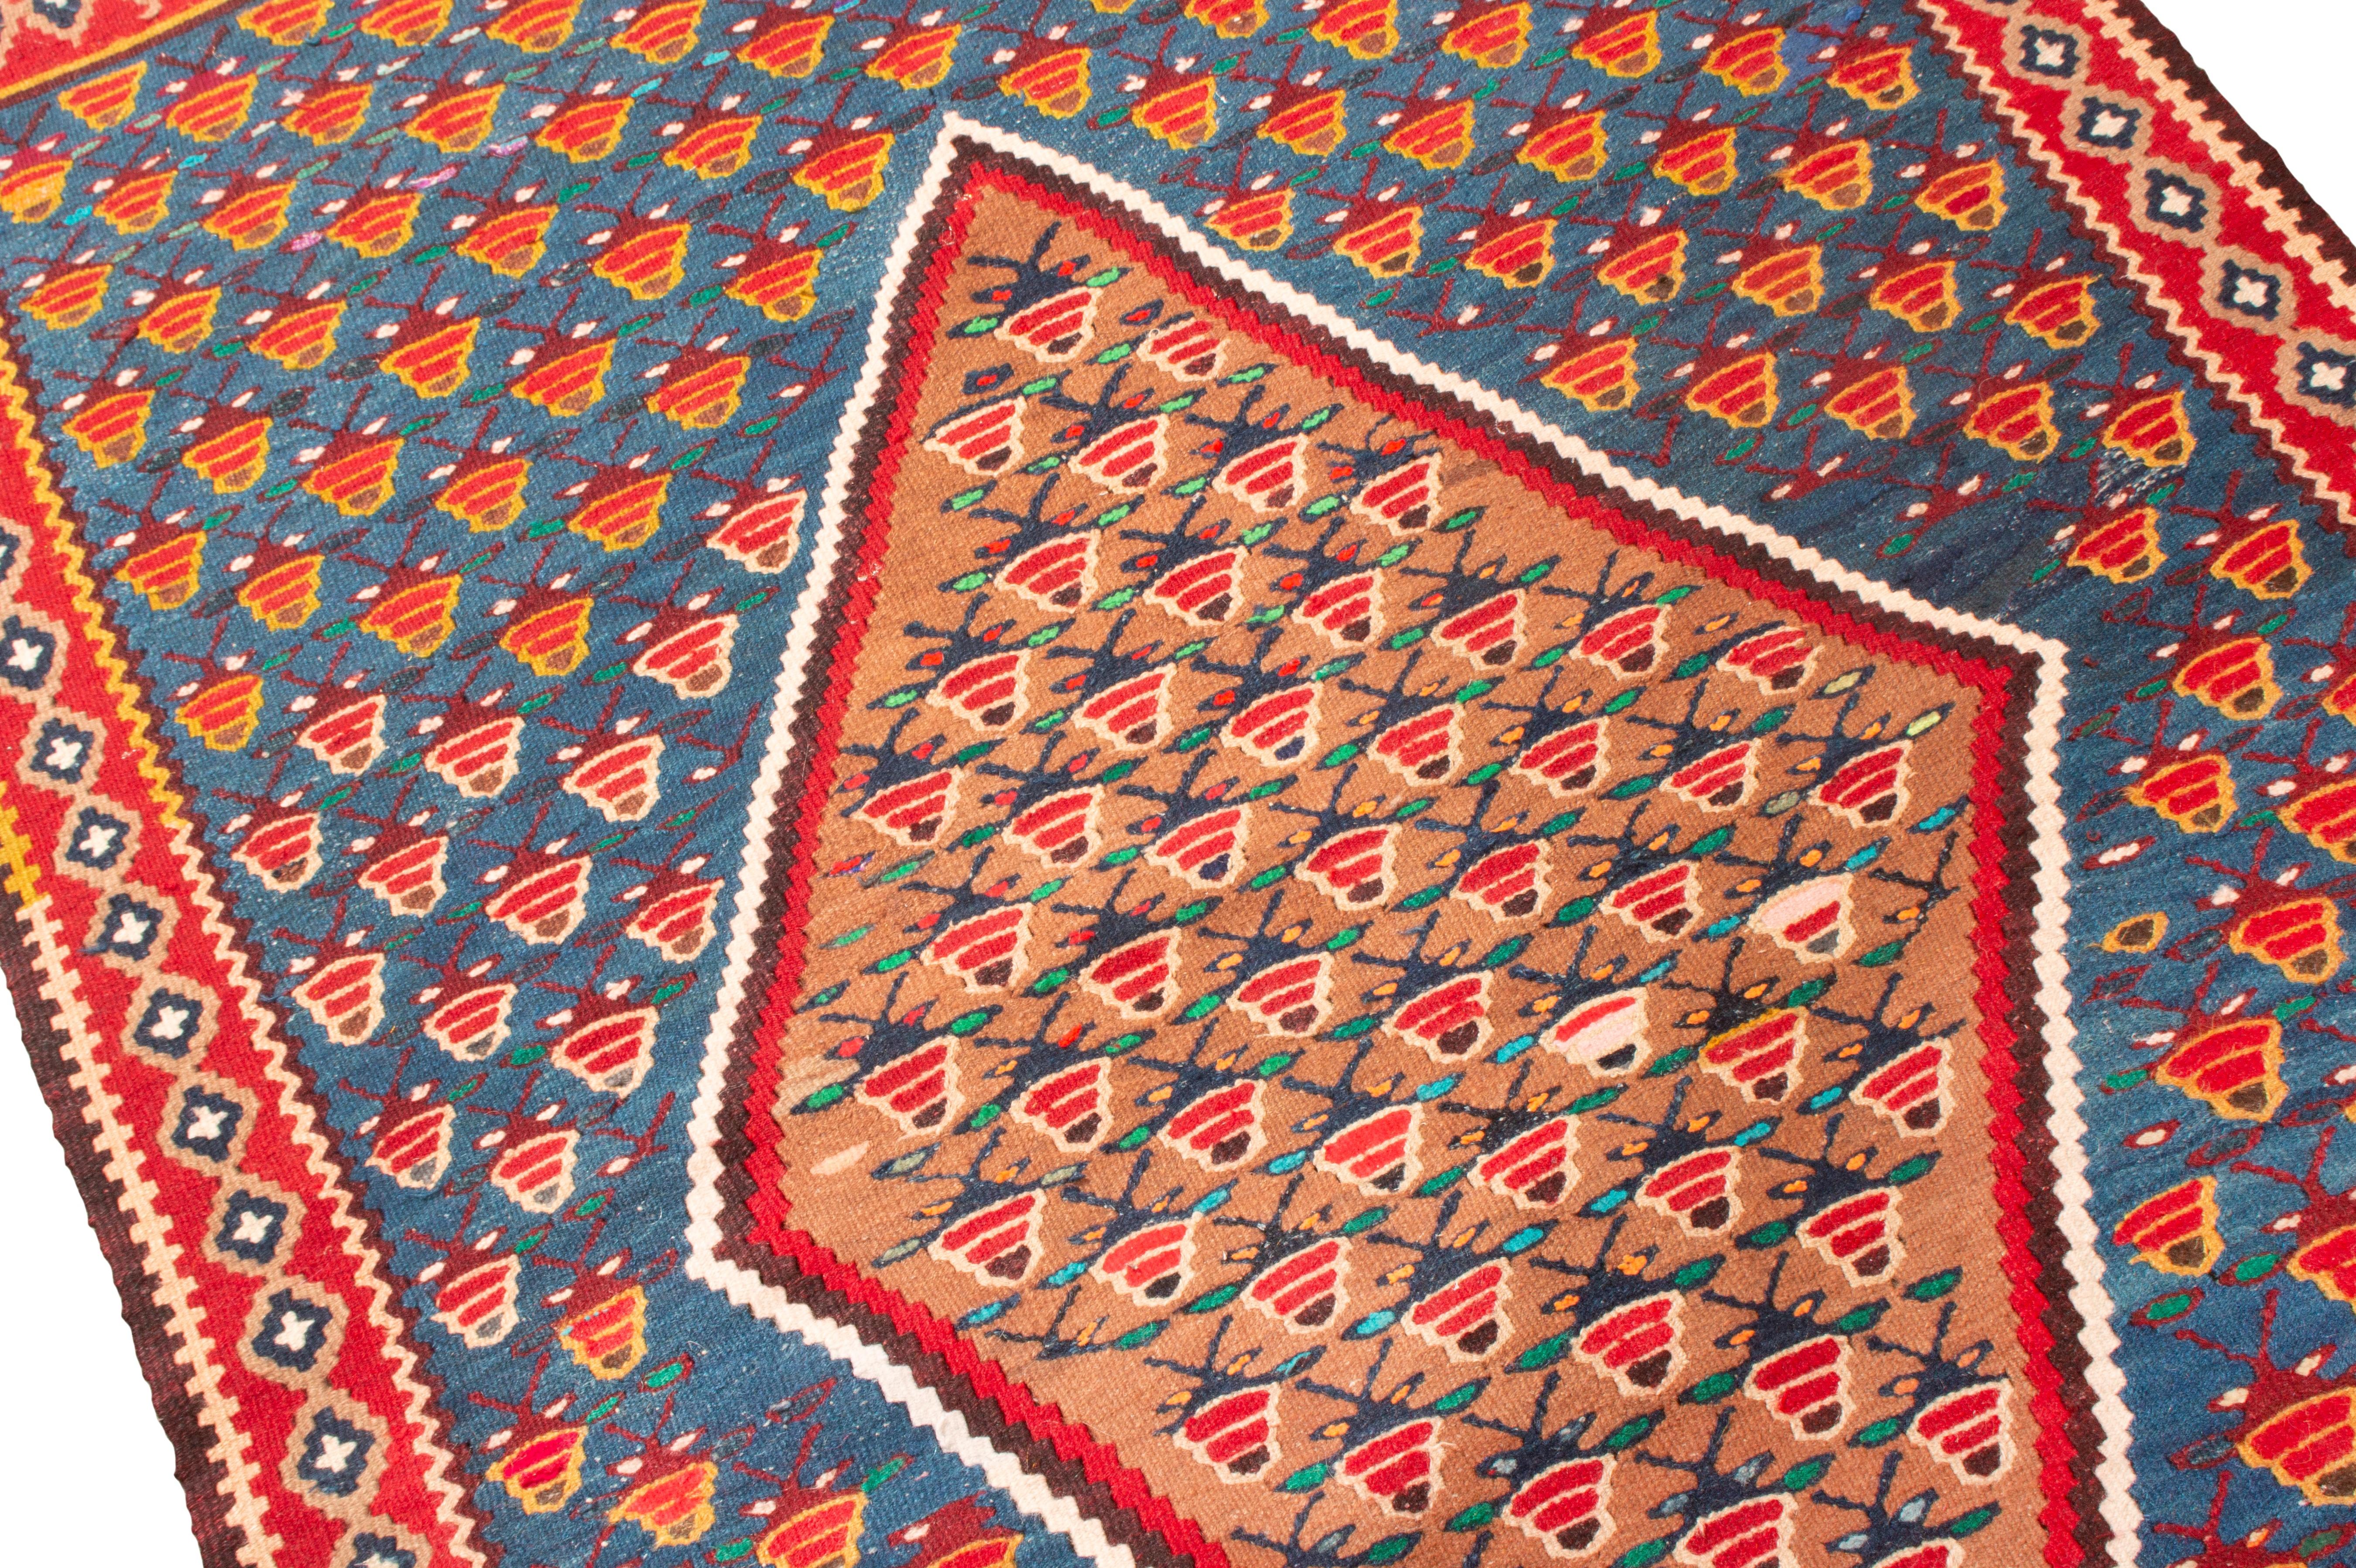 Hand-Knotted Vintage Midcentury Senneh Red and Blue Persian Kilim Rug